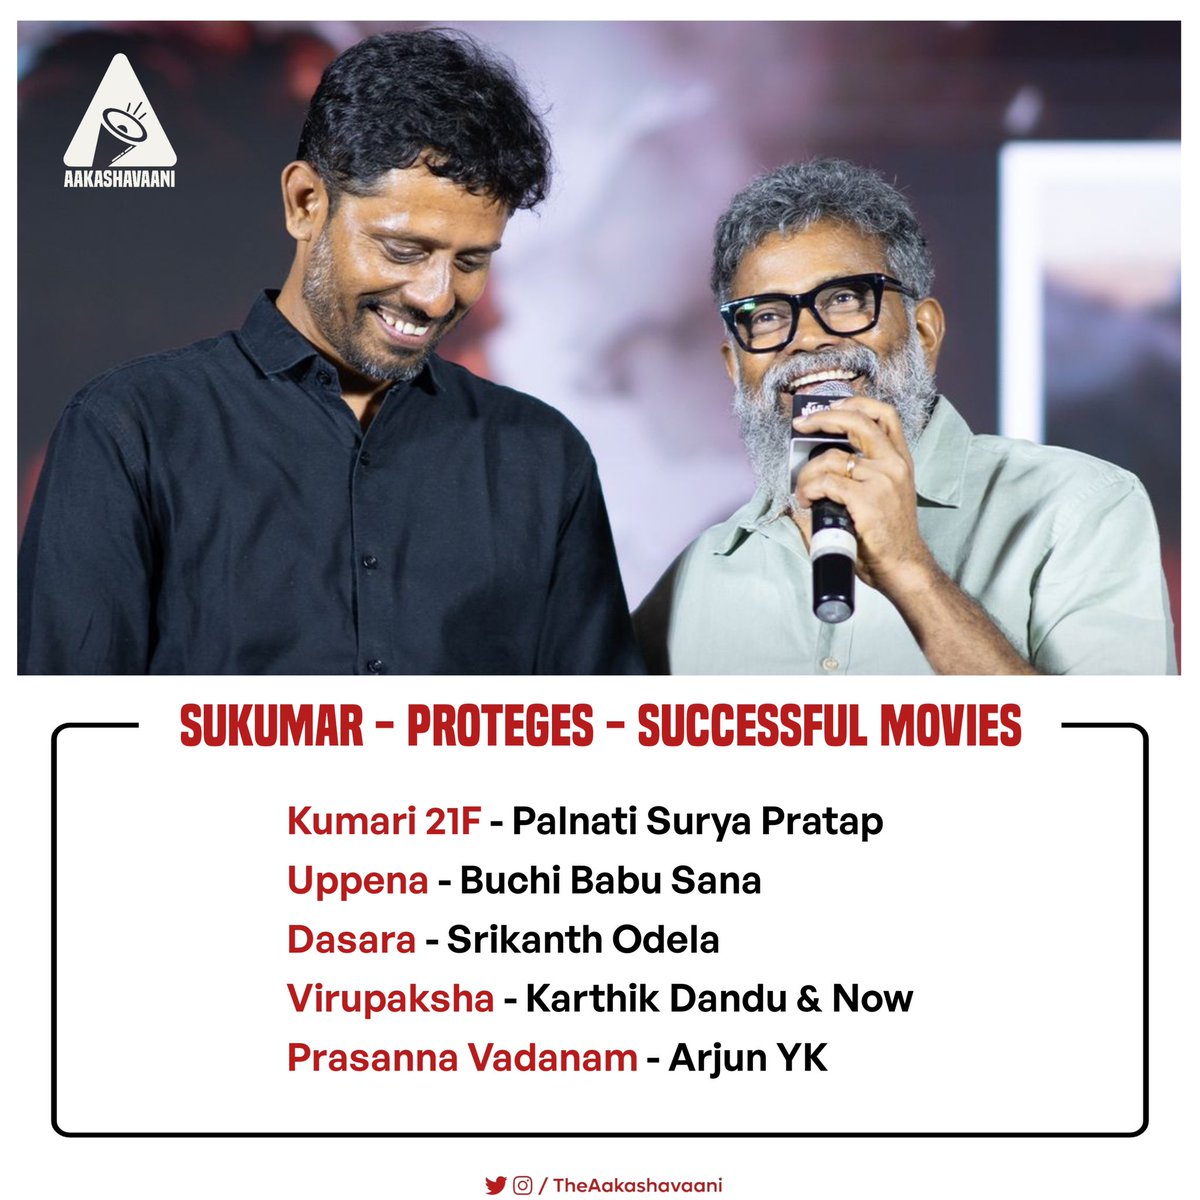 From #Kumari21F To #PrasannaVadanam Here is the list of five proteges of #Sukumar who made successful movies as directors.